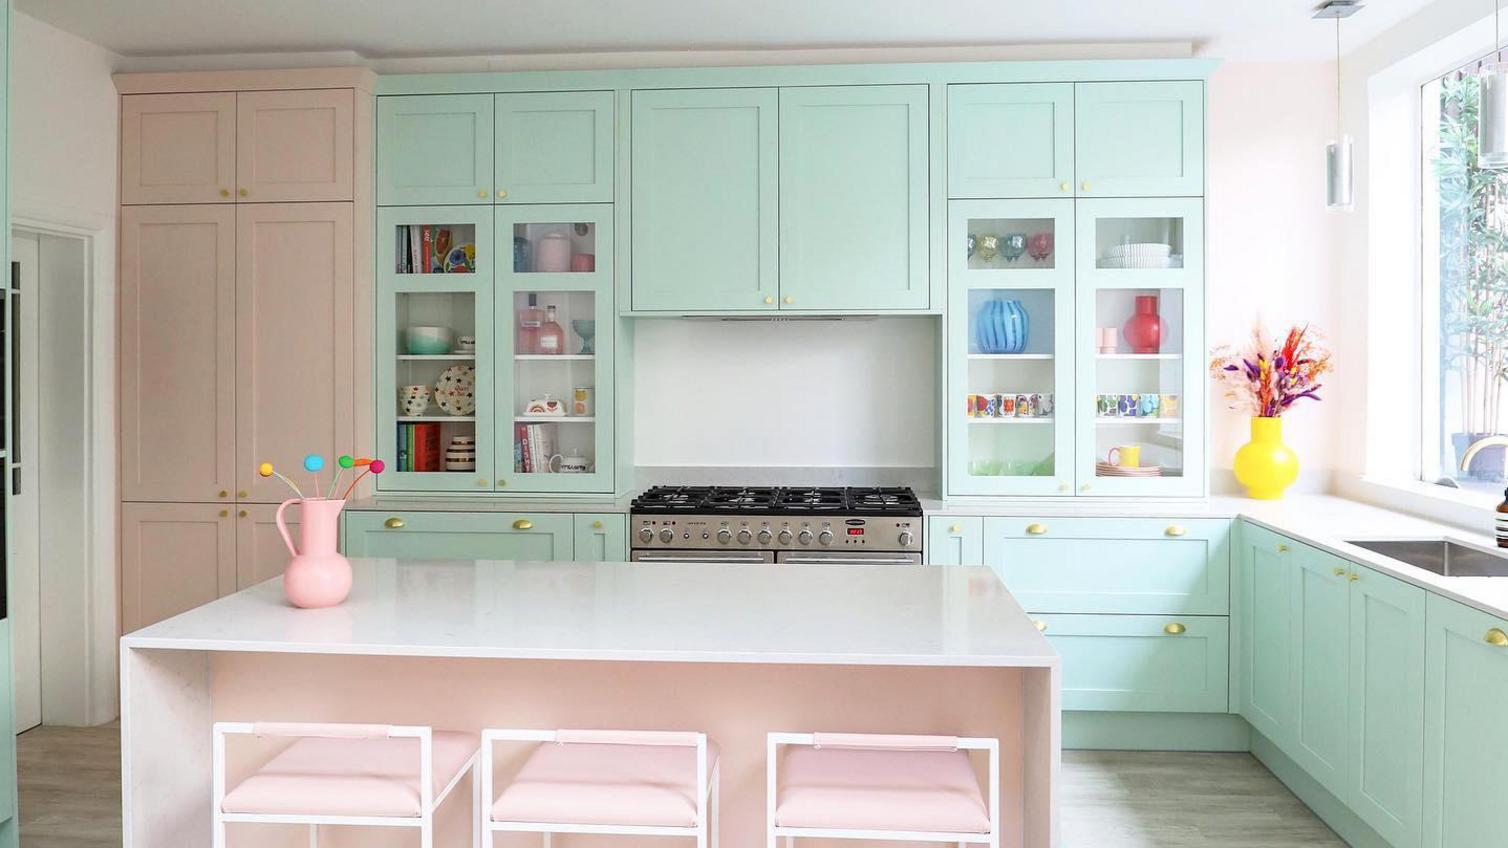 A pink and blue kitchen from Howdens